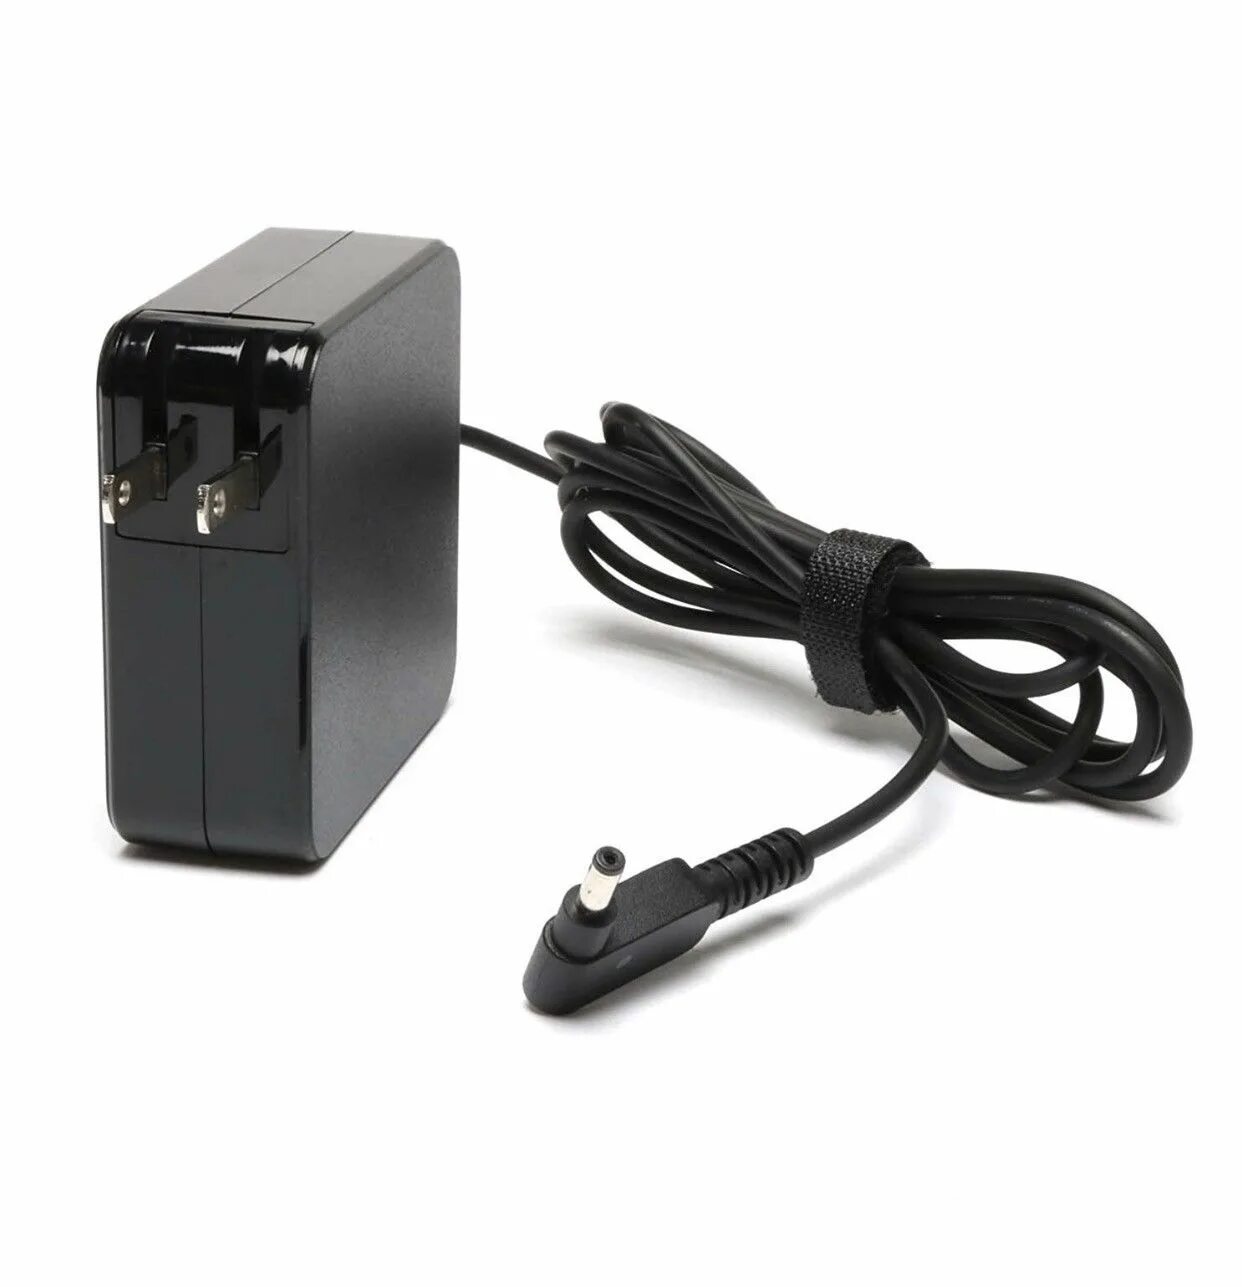 ASUS ux31 зарядное. Адаптер ASUS 19v 3.42a 4*1.35. AC Adapter for ASUS ZENBOOK pa-1650-66 ADP-65aw a 4.0mm*1.35mm 65w Laptop Power. ASUS AC Adapter 65w.